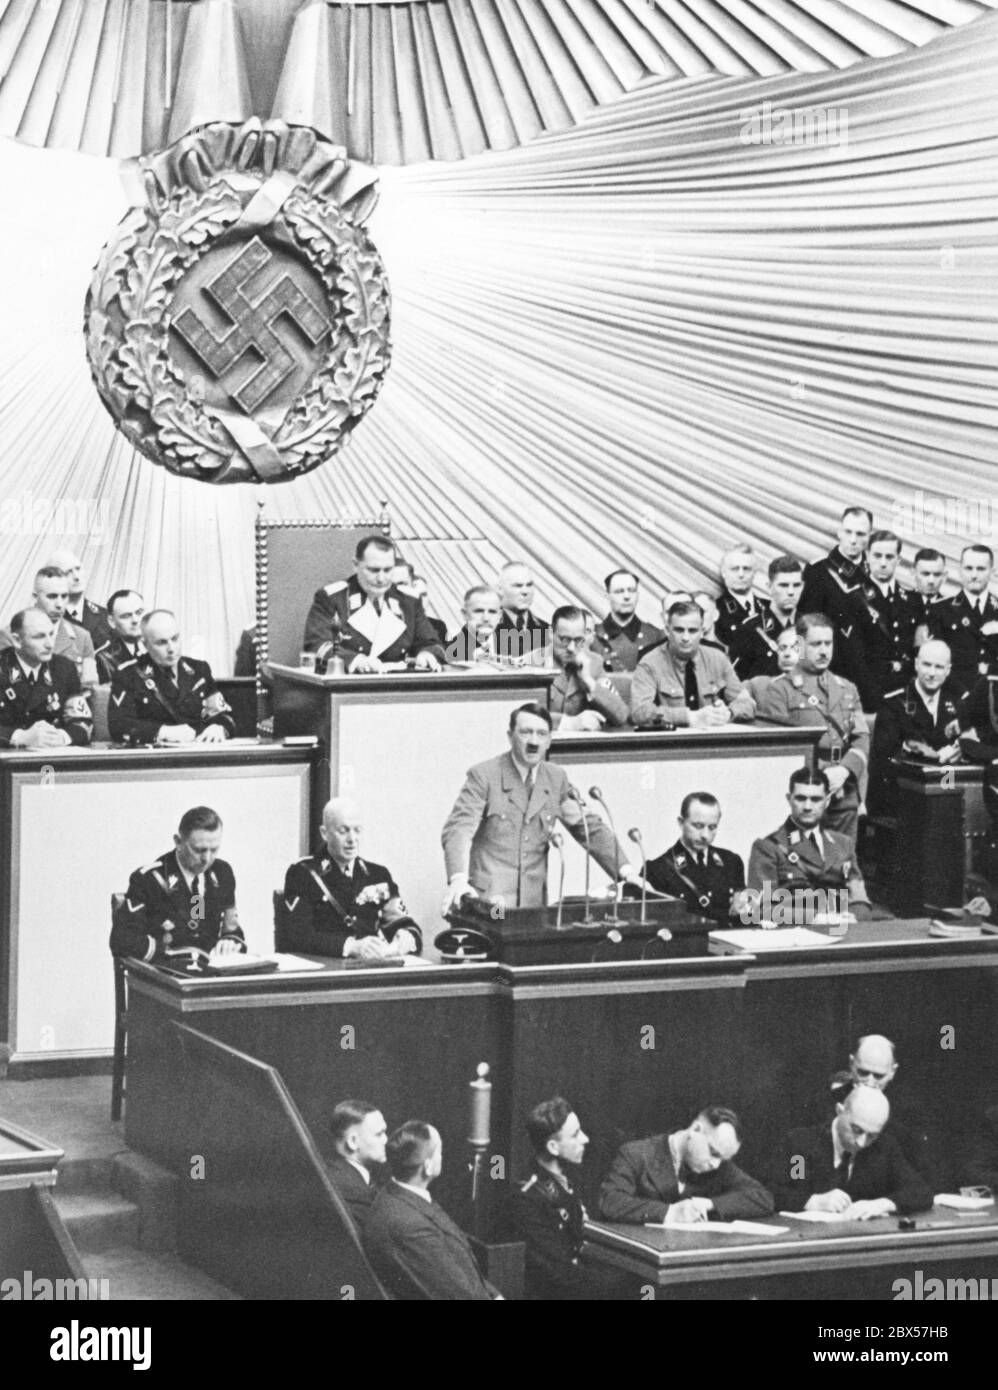 Adolf Hitler during his speech at a session of the Reichstag in the Berlin Kroll Opera House. Behind him at the desk of the Reichstag President sits Hermann Goering. Stock Photo